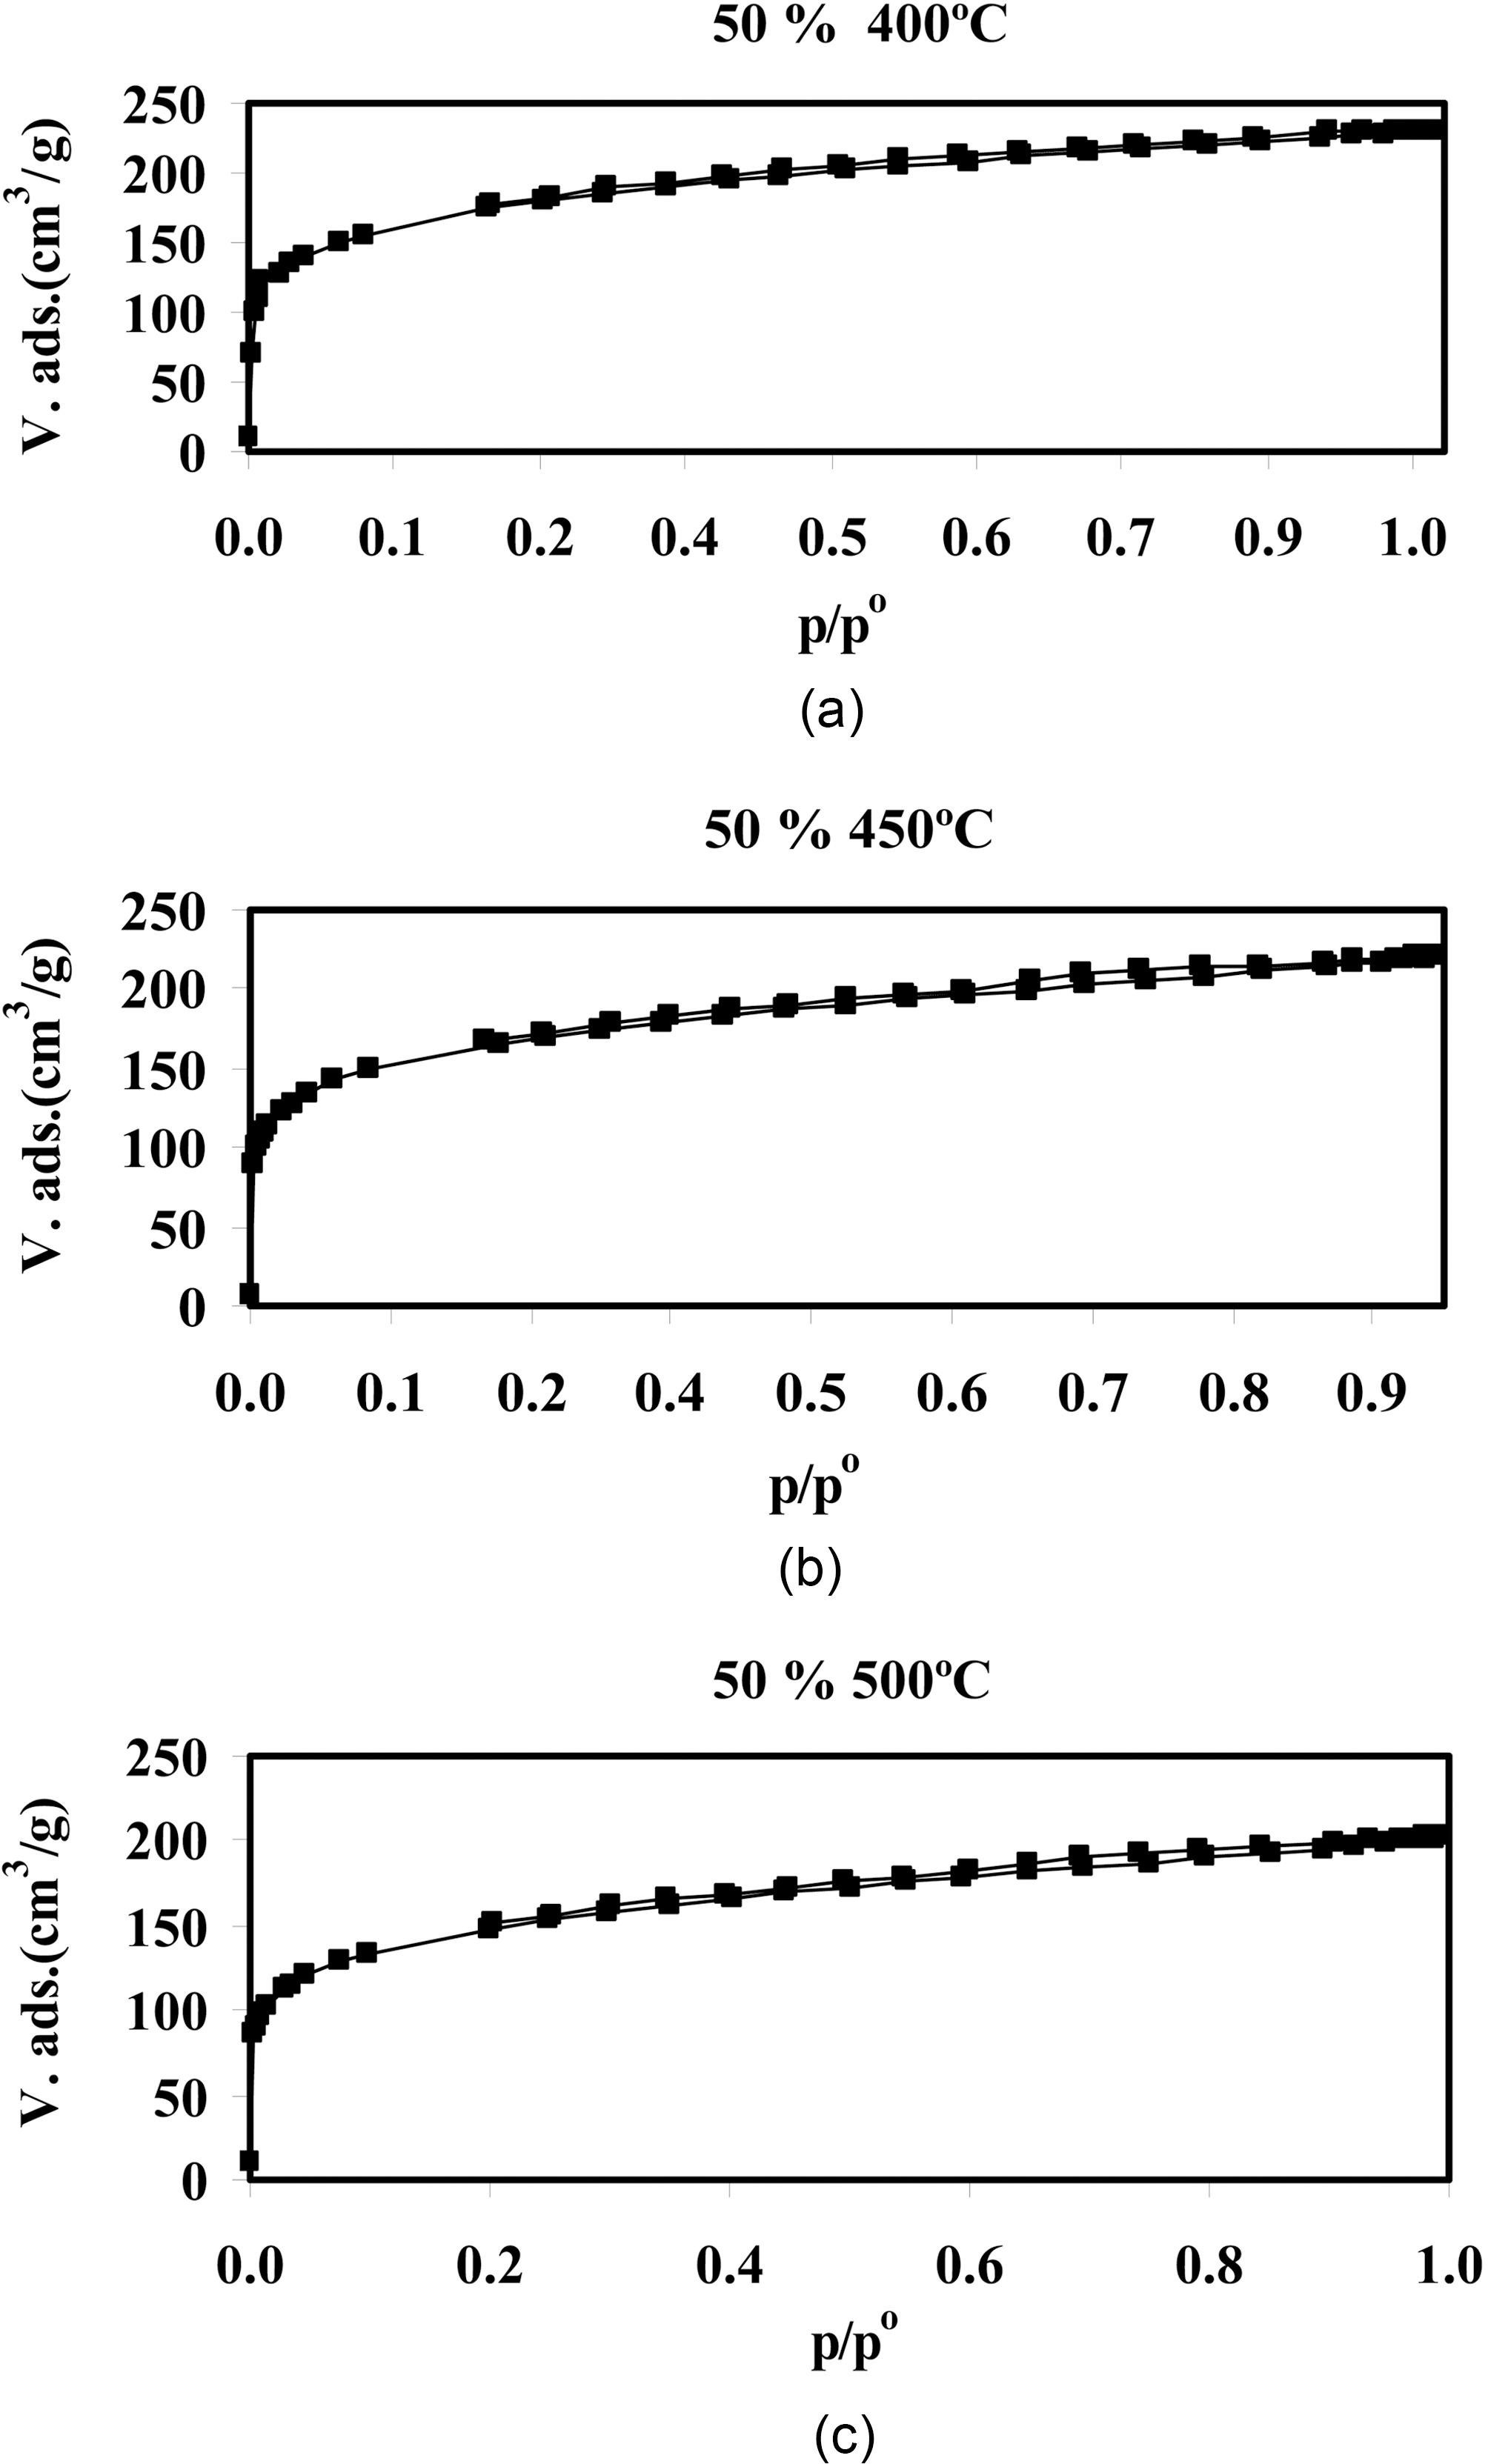 N2 Representative adsorption isotherms on ACs prepared by impregnation with 50% H3PO4.